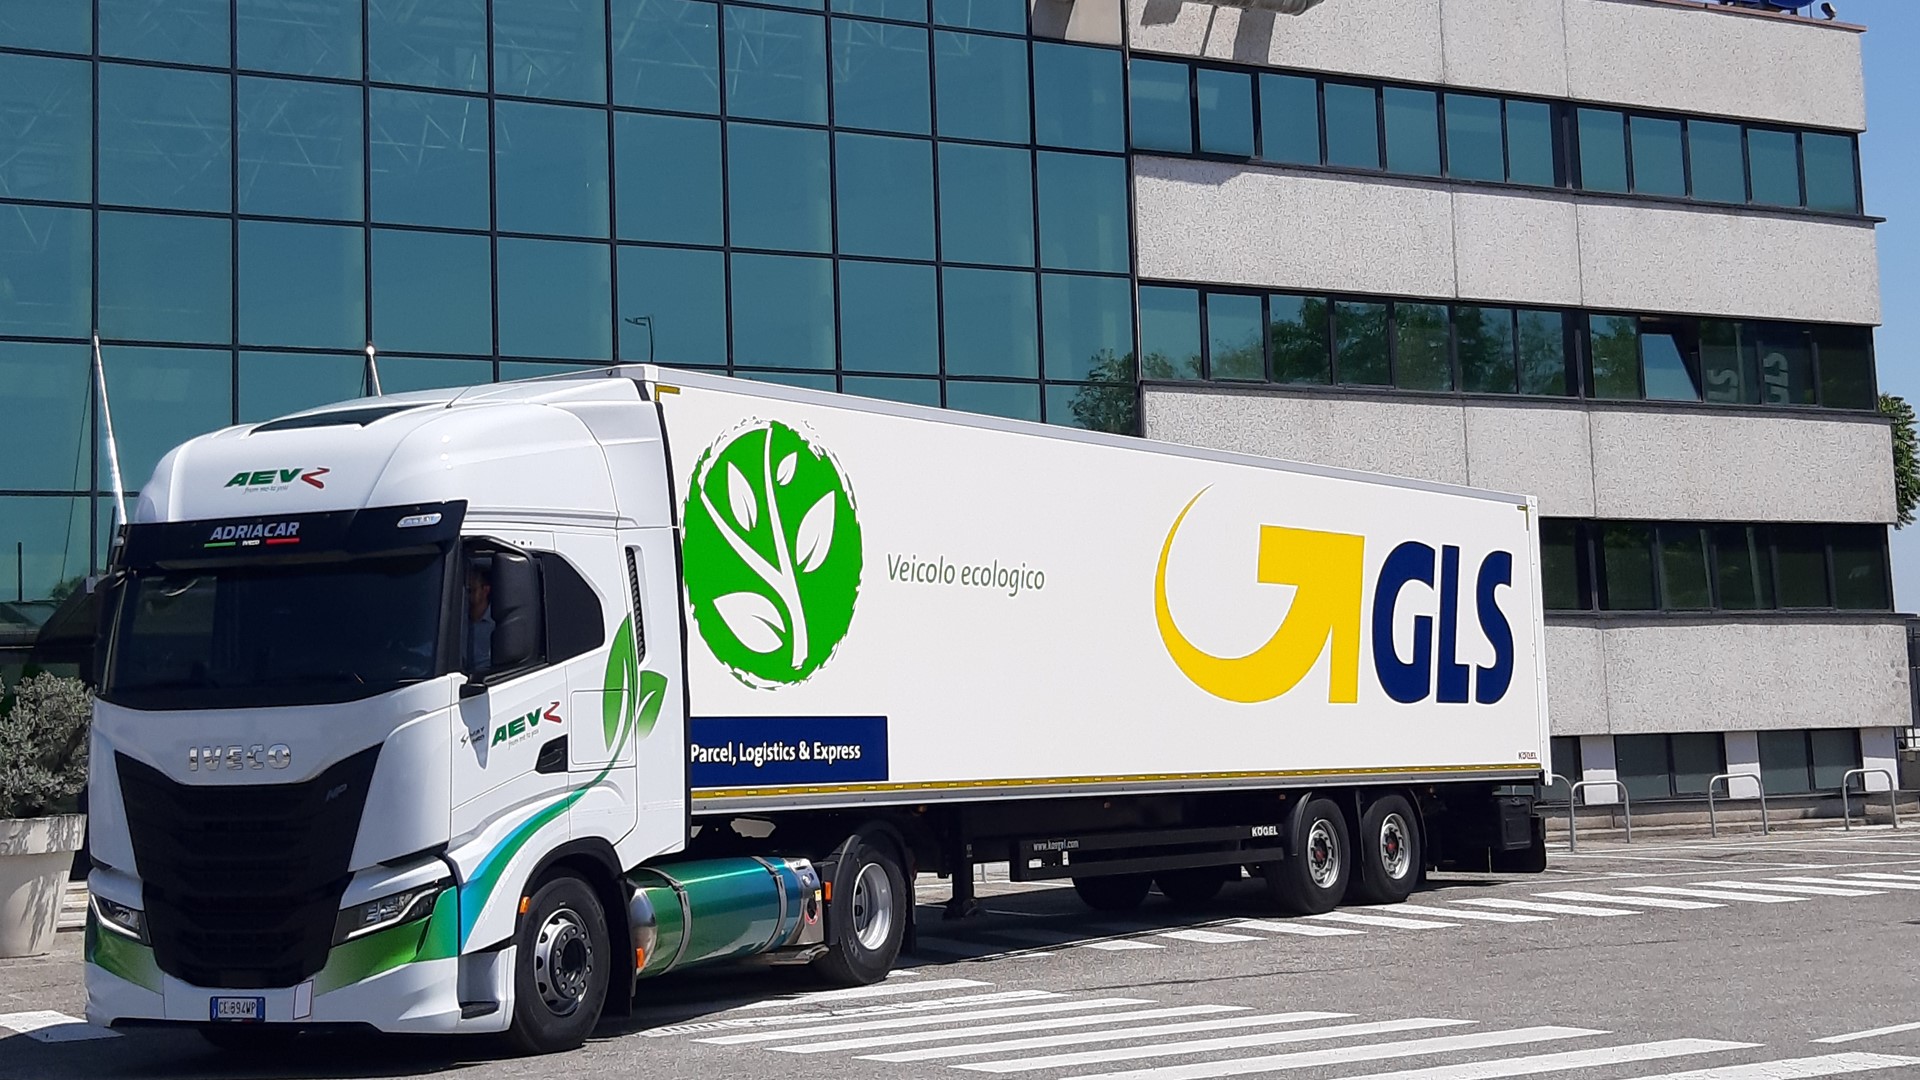 As part of its commitment to sustainability, GLS updates its fleet with 120 IVECO S-WAY LNG and Bio-LNG powered vehicles